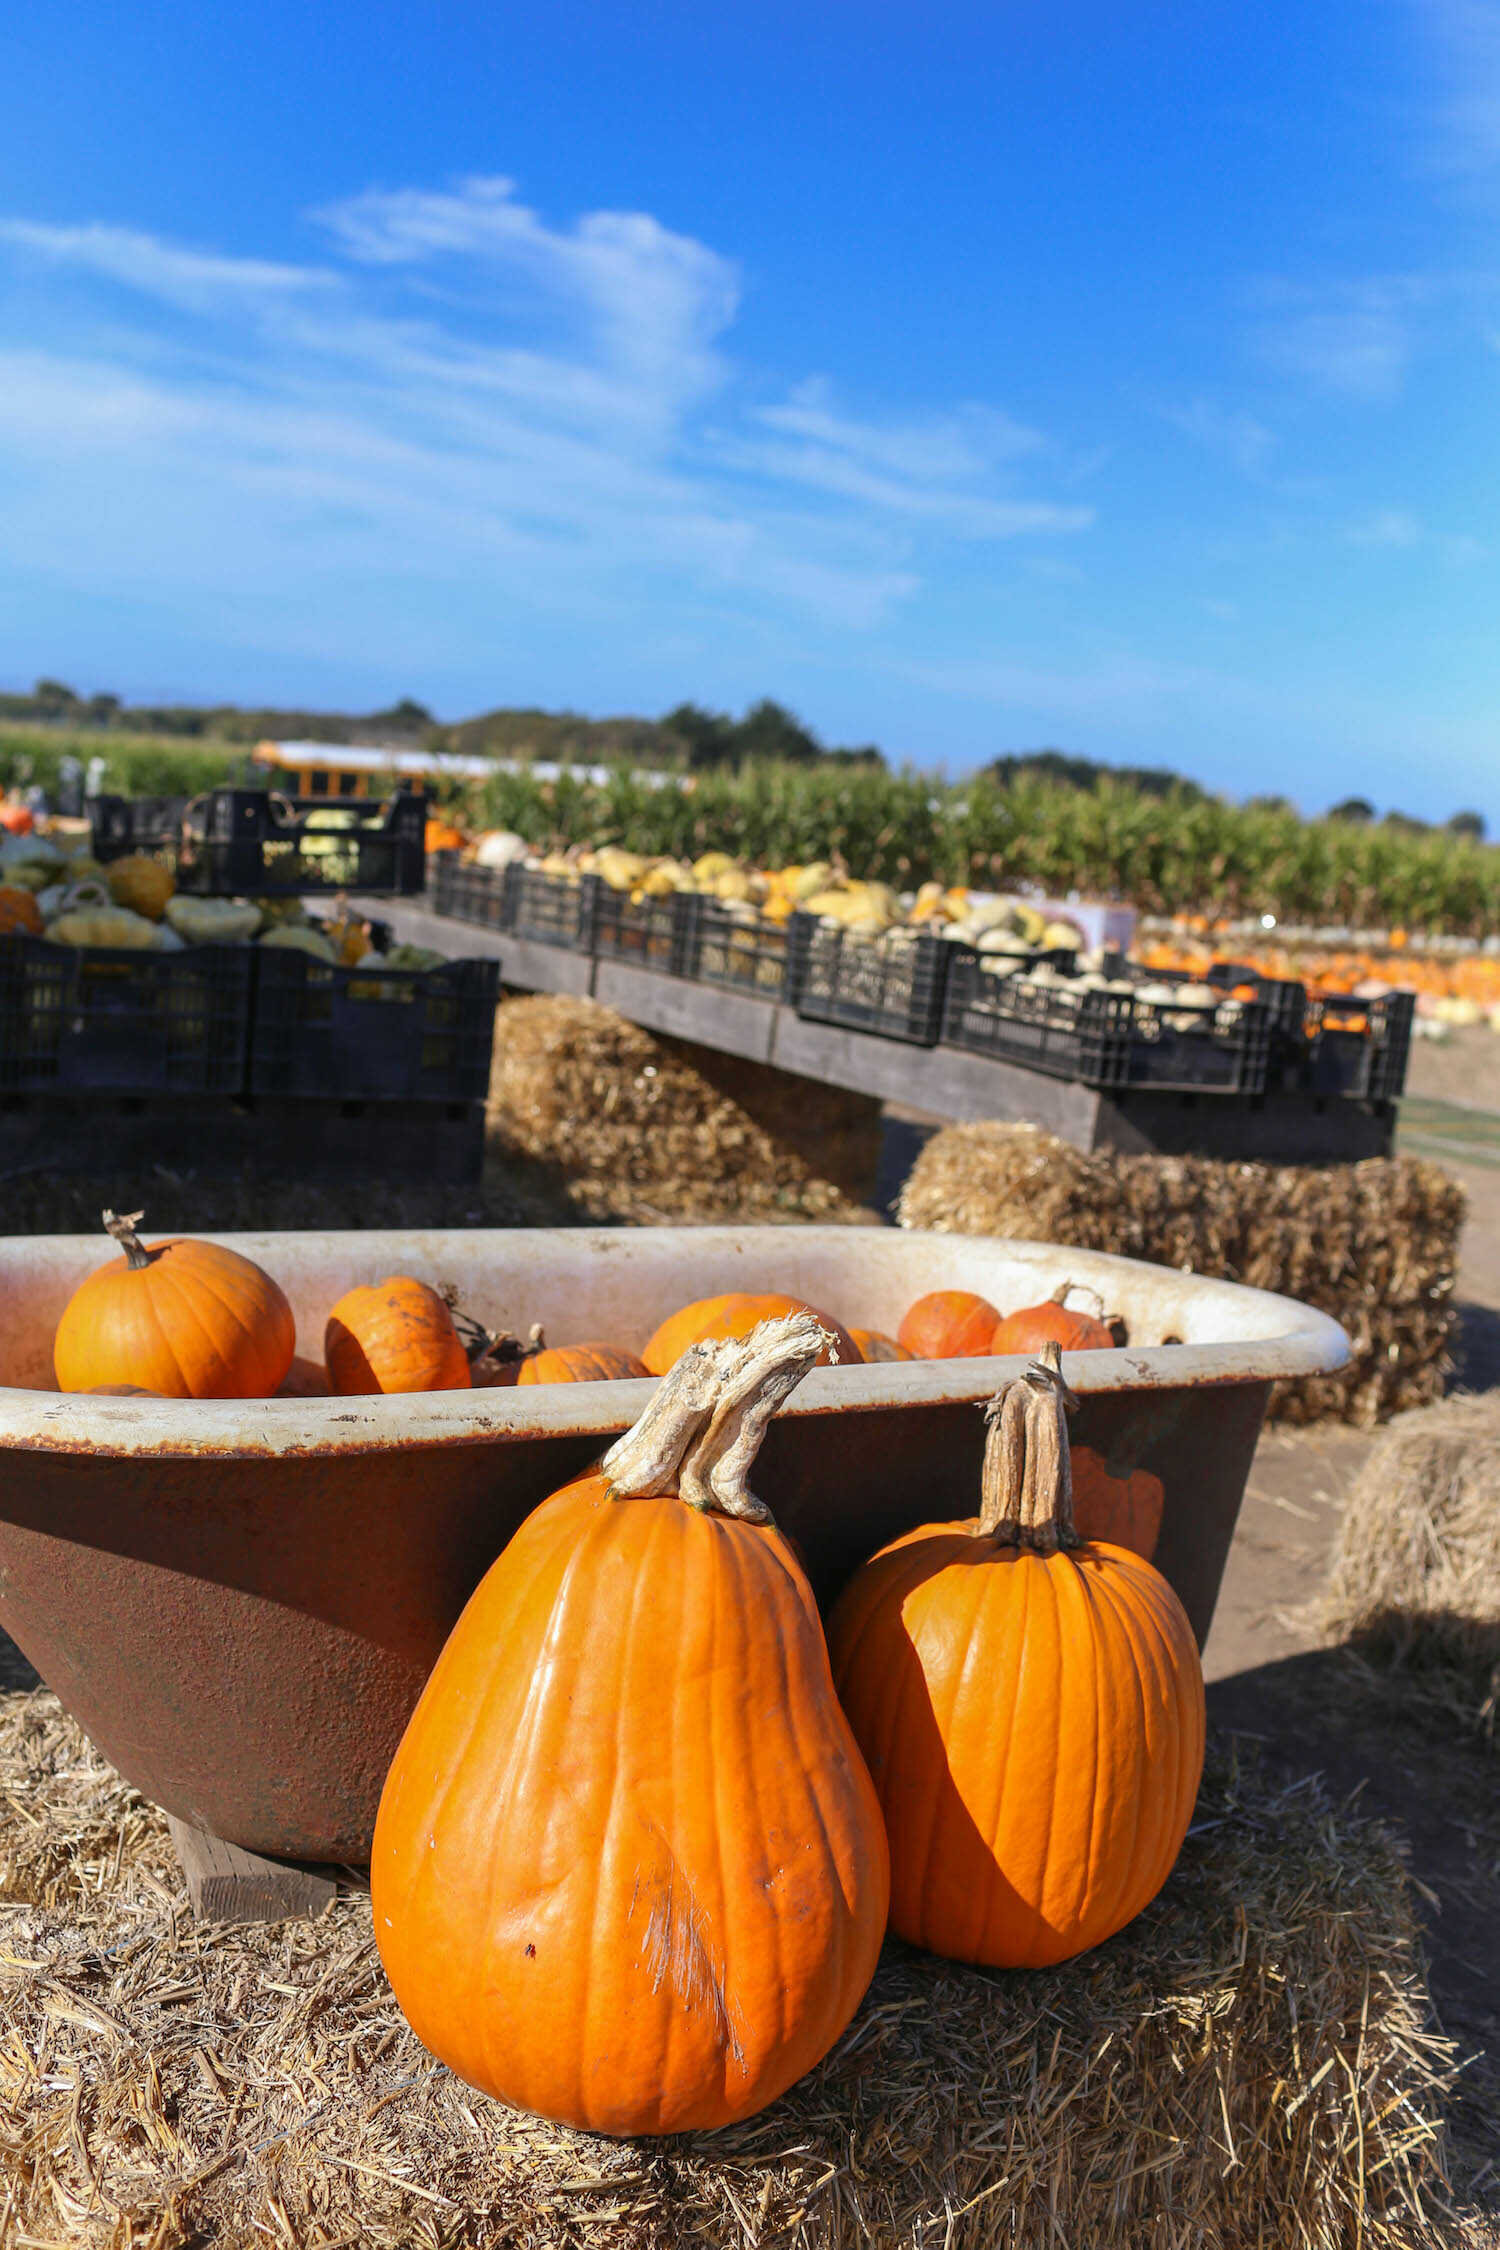 Best Pumpkin Patches and Farms for Photos in Half Moon Bay